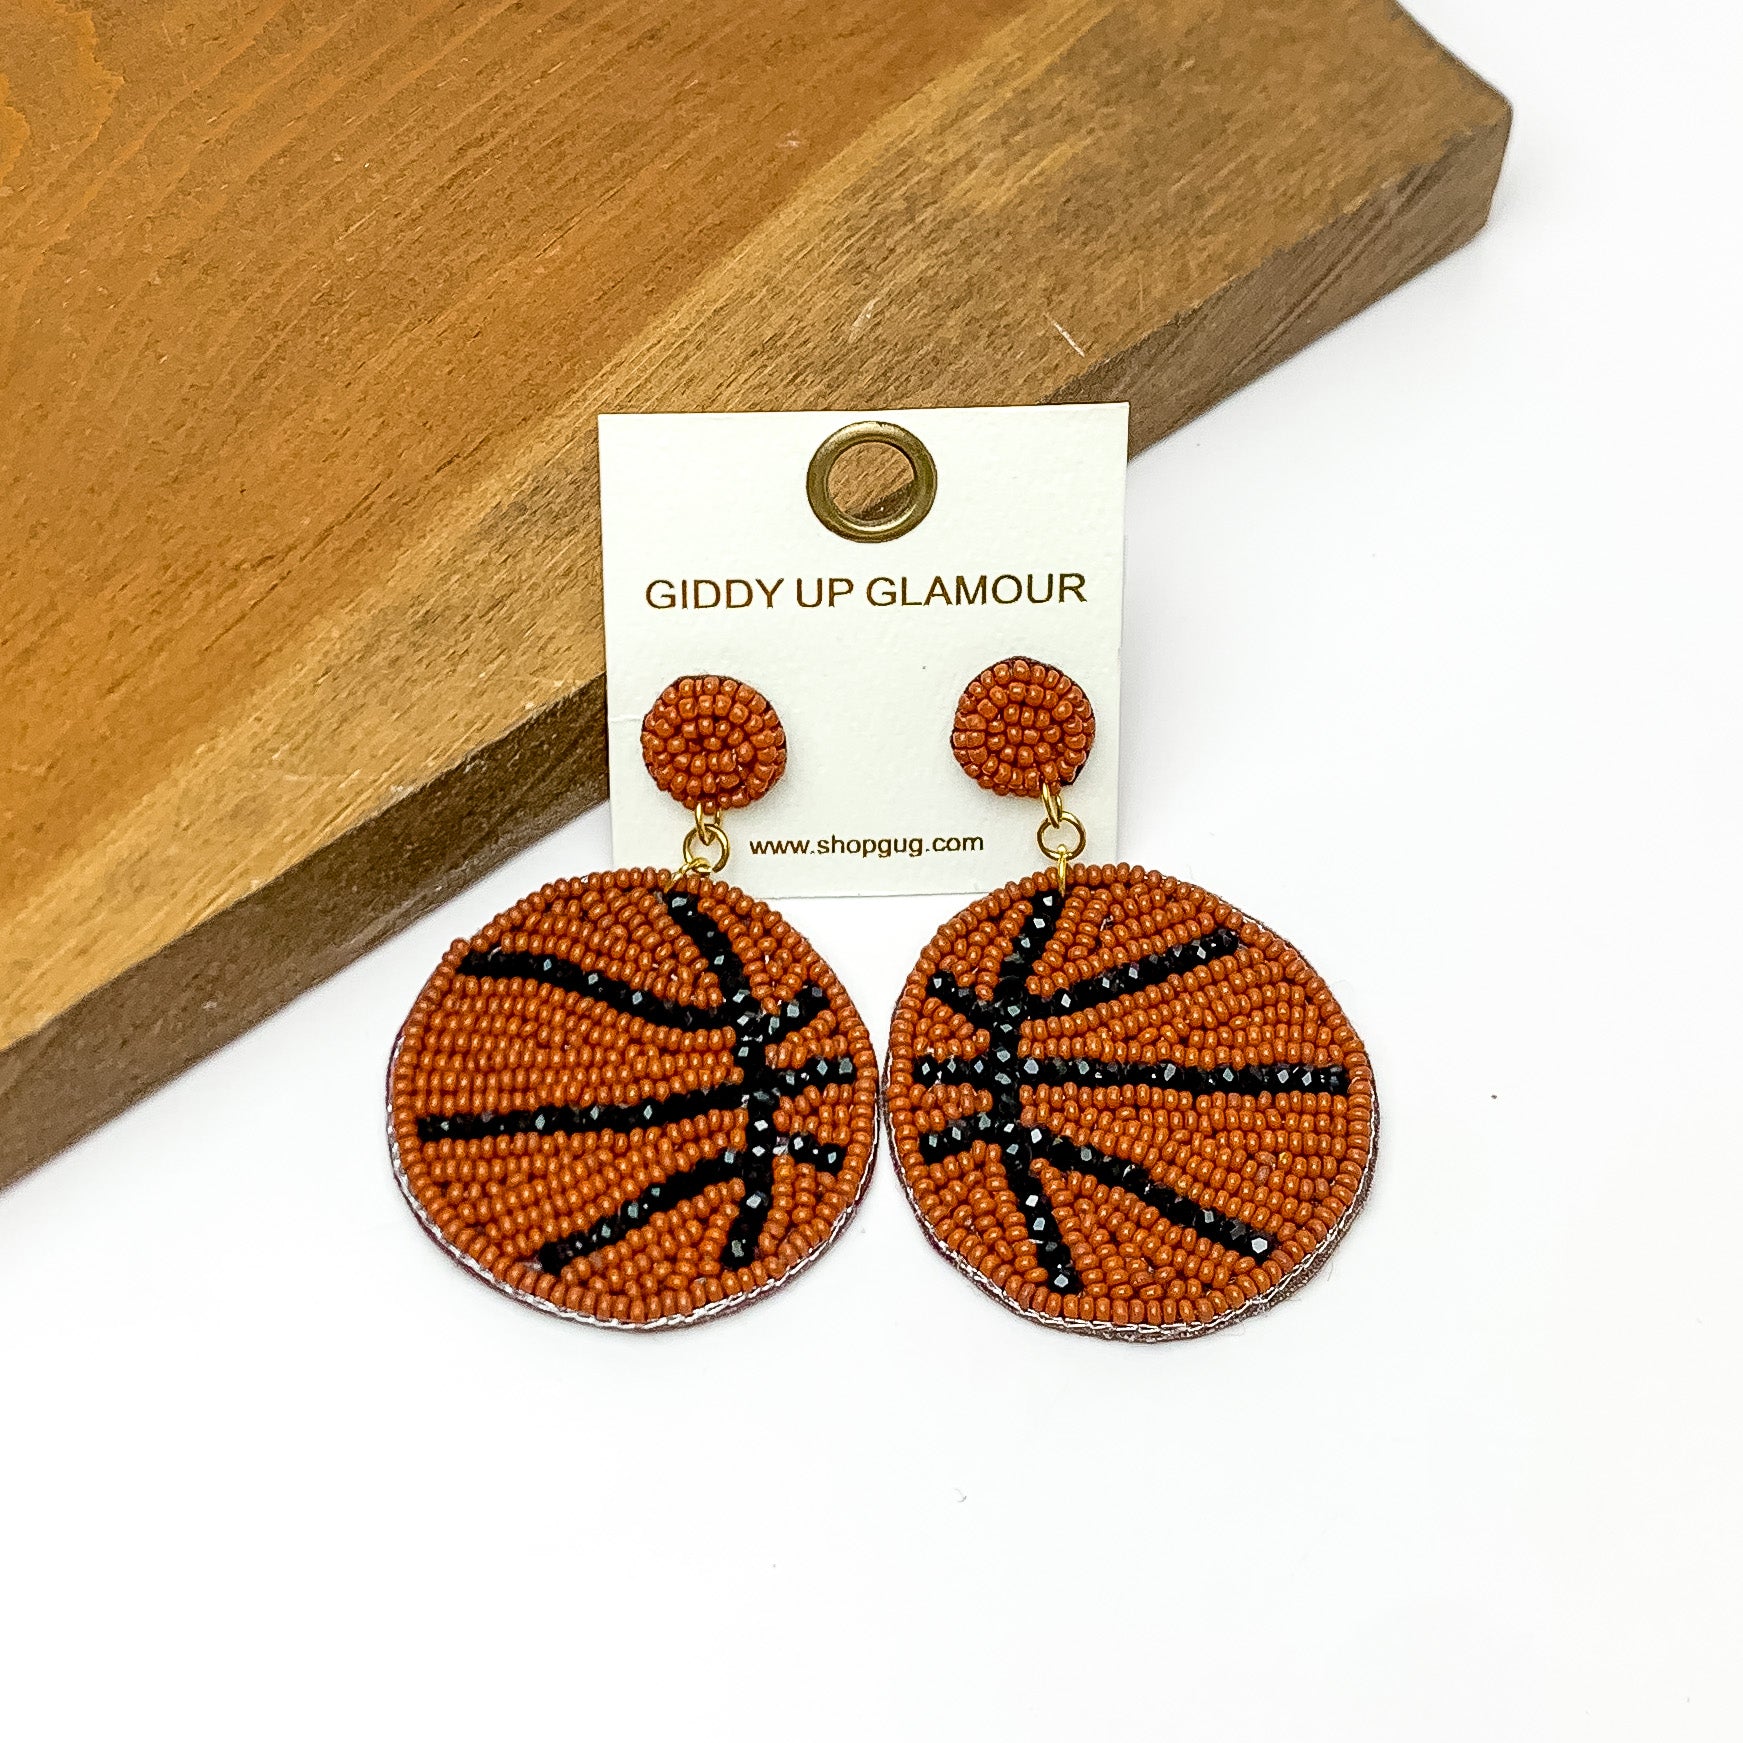 Basketball Circular Beaded Earrings in Brown. Pictured on a white background with the earrings against a wood piece.